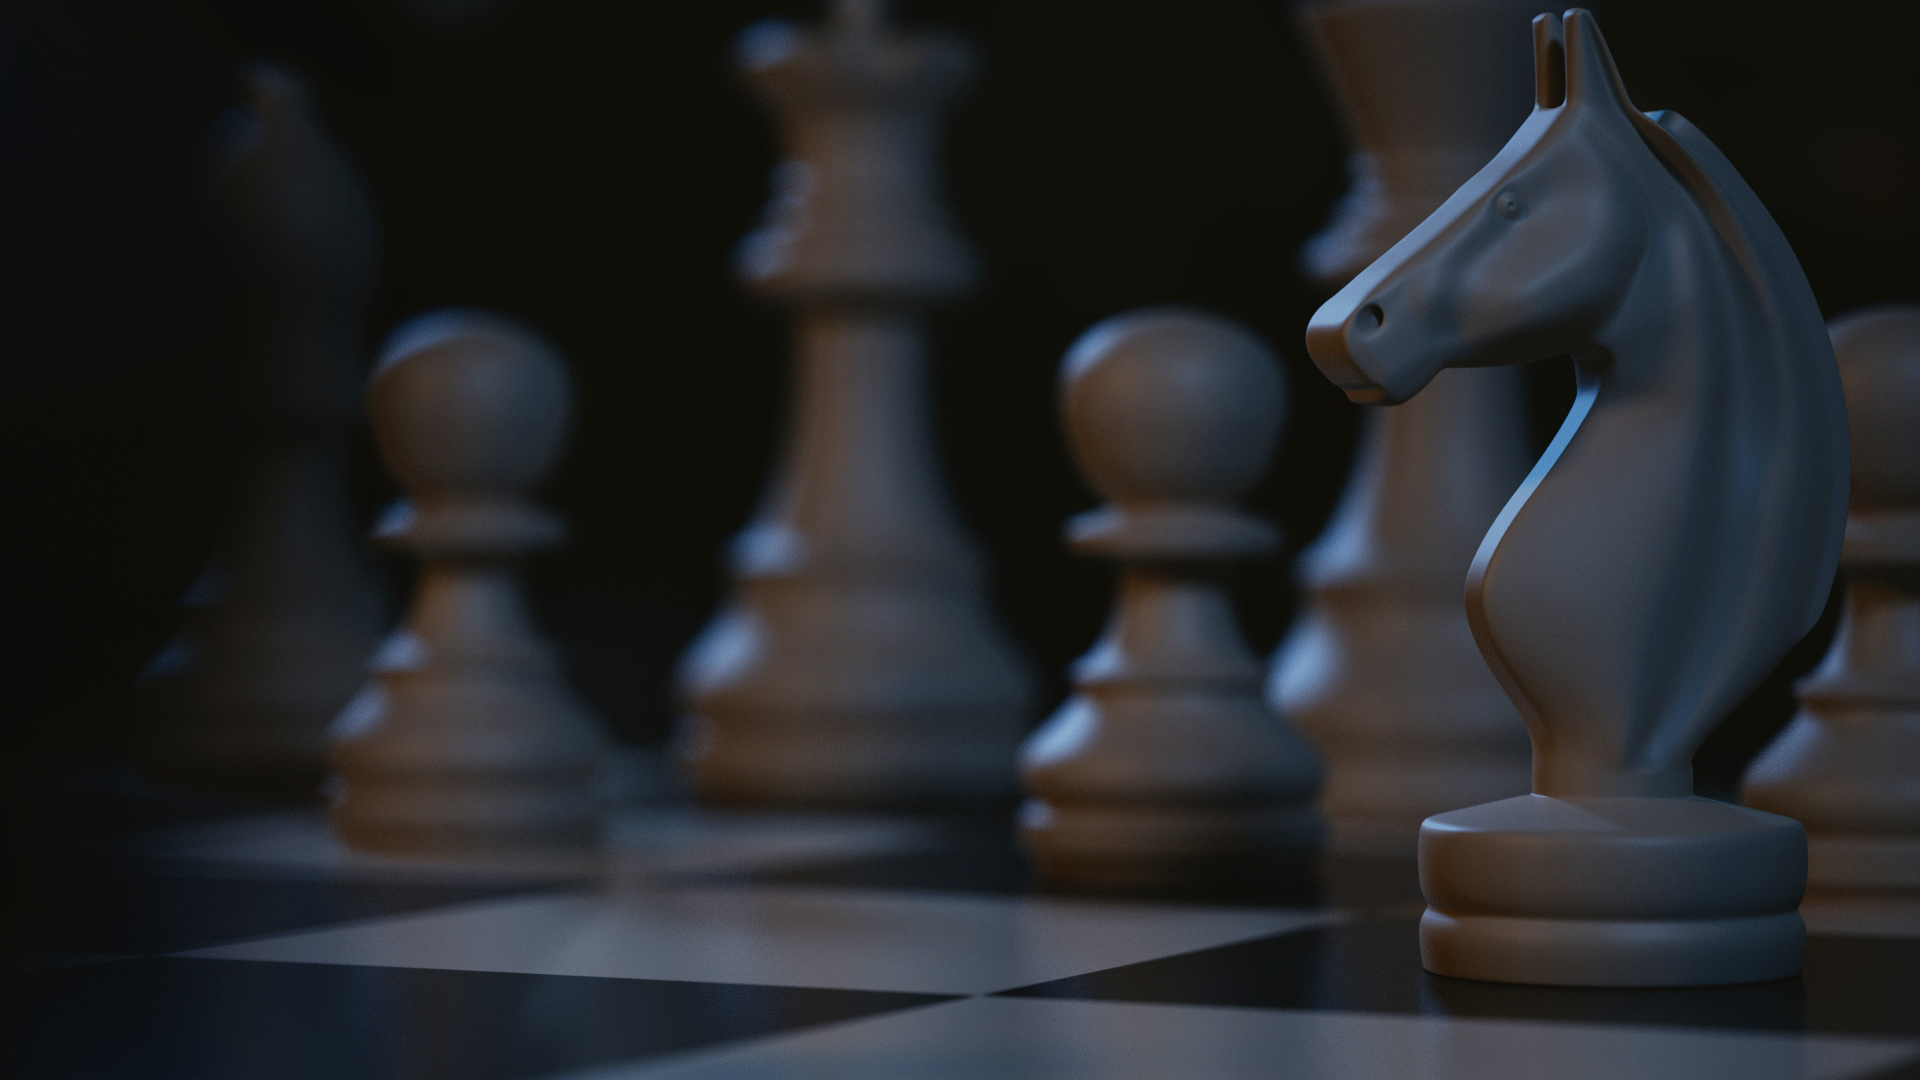 Lighting & Composition experiment with chess model - Focused Critiques ...